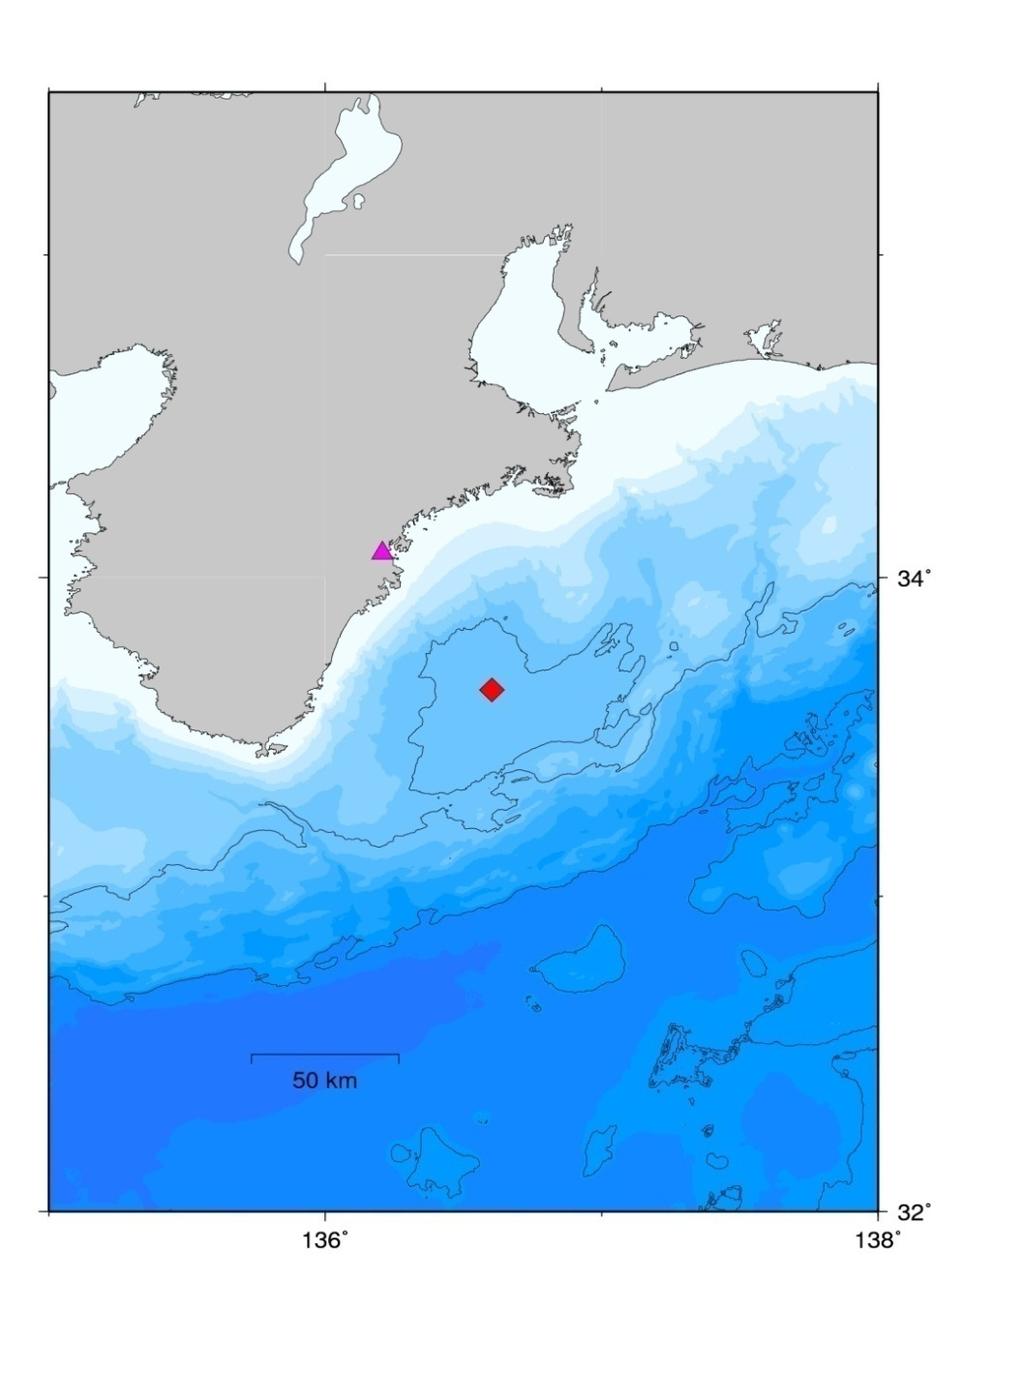 Tsunami observation by the ocean-bottom pressure gauges of DONET: An